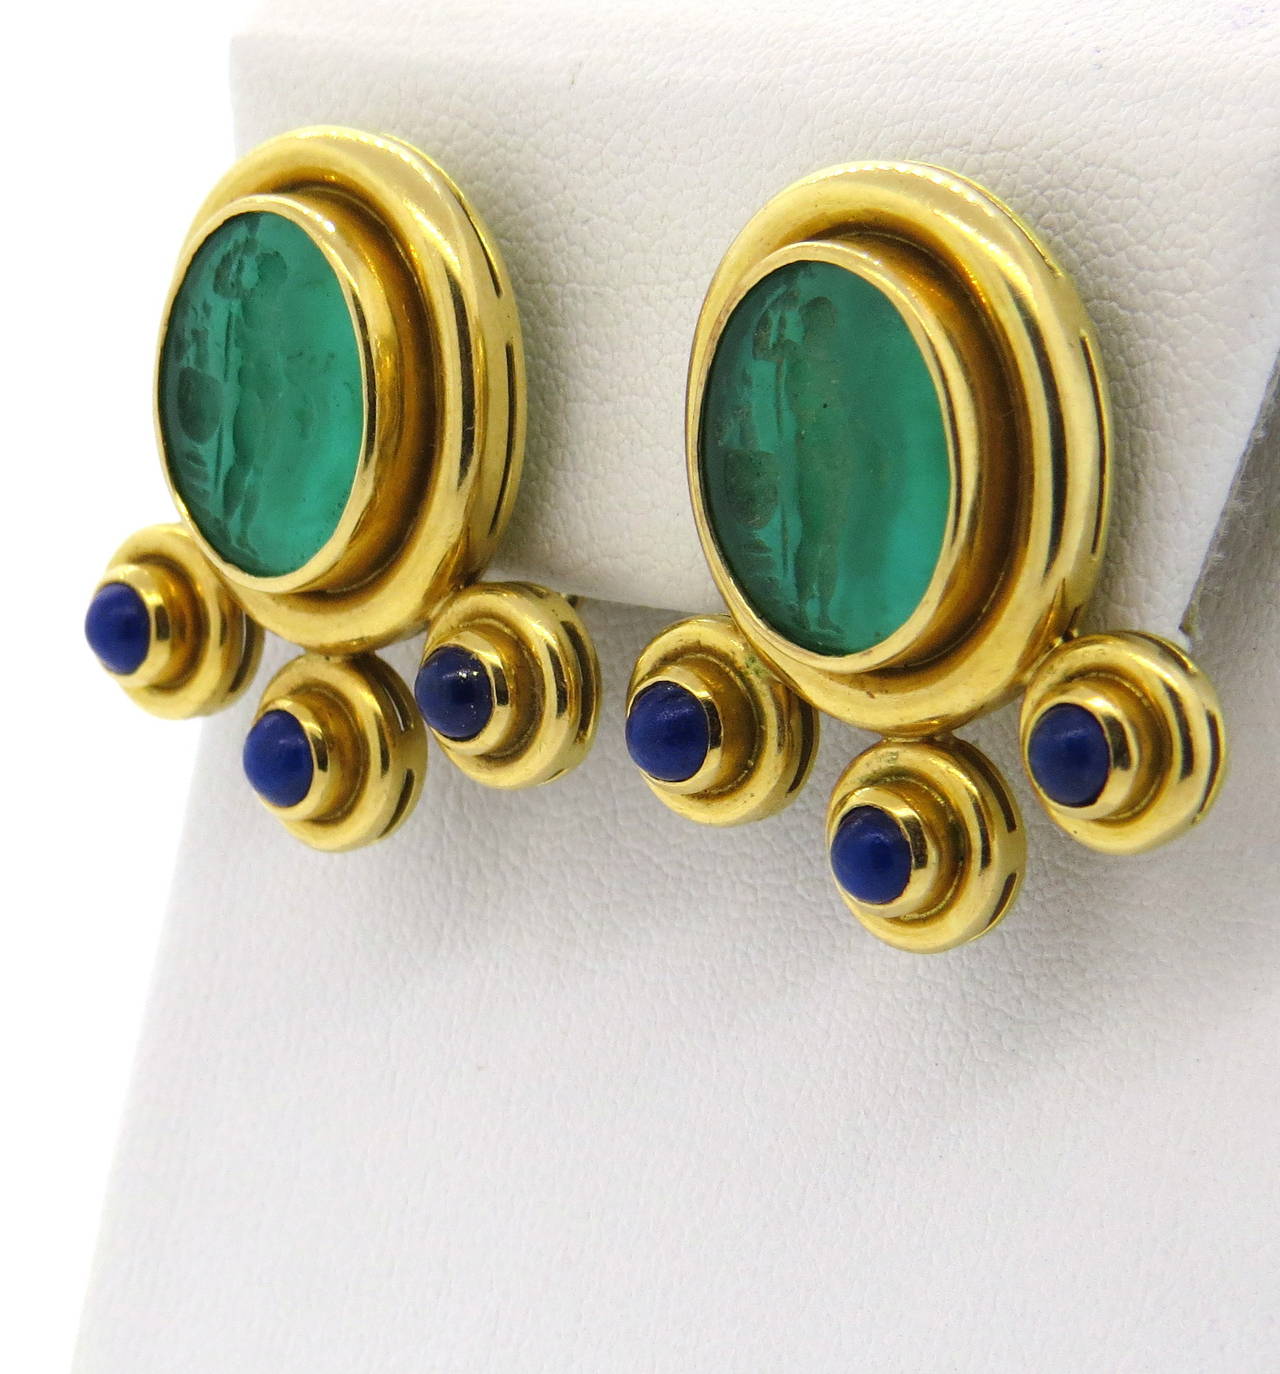 Stunning 18K gold Elizabeth Locke earrings featuring classic intaglio Venetian glass and lapis. Earring measure 29mm long x 27mm at widest point. Marked with Locke hallmark, 18K. Weight of earrings - 22.0 grams.